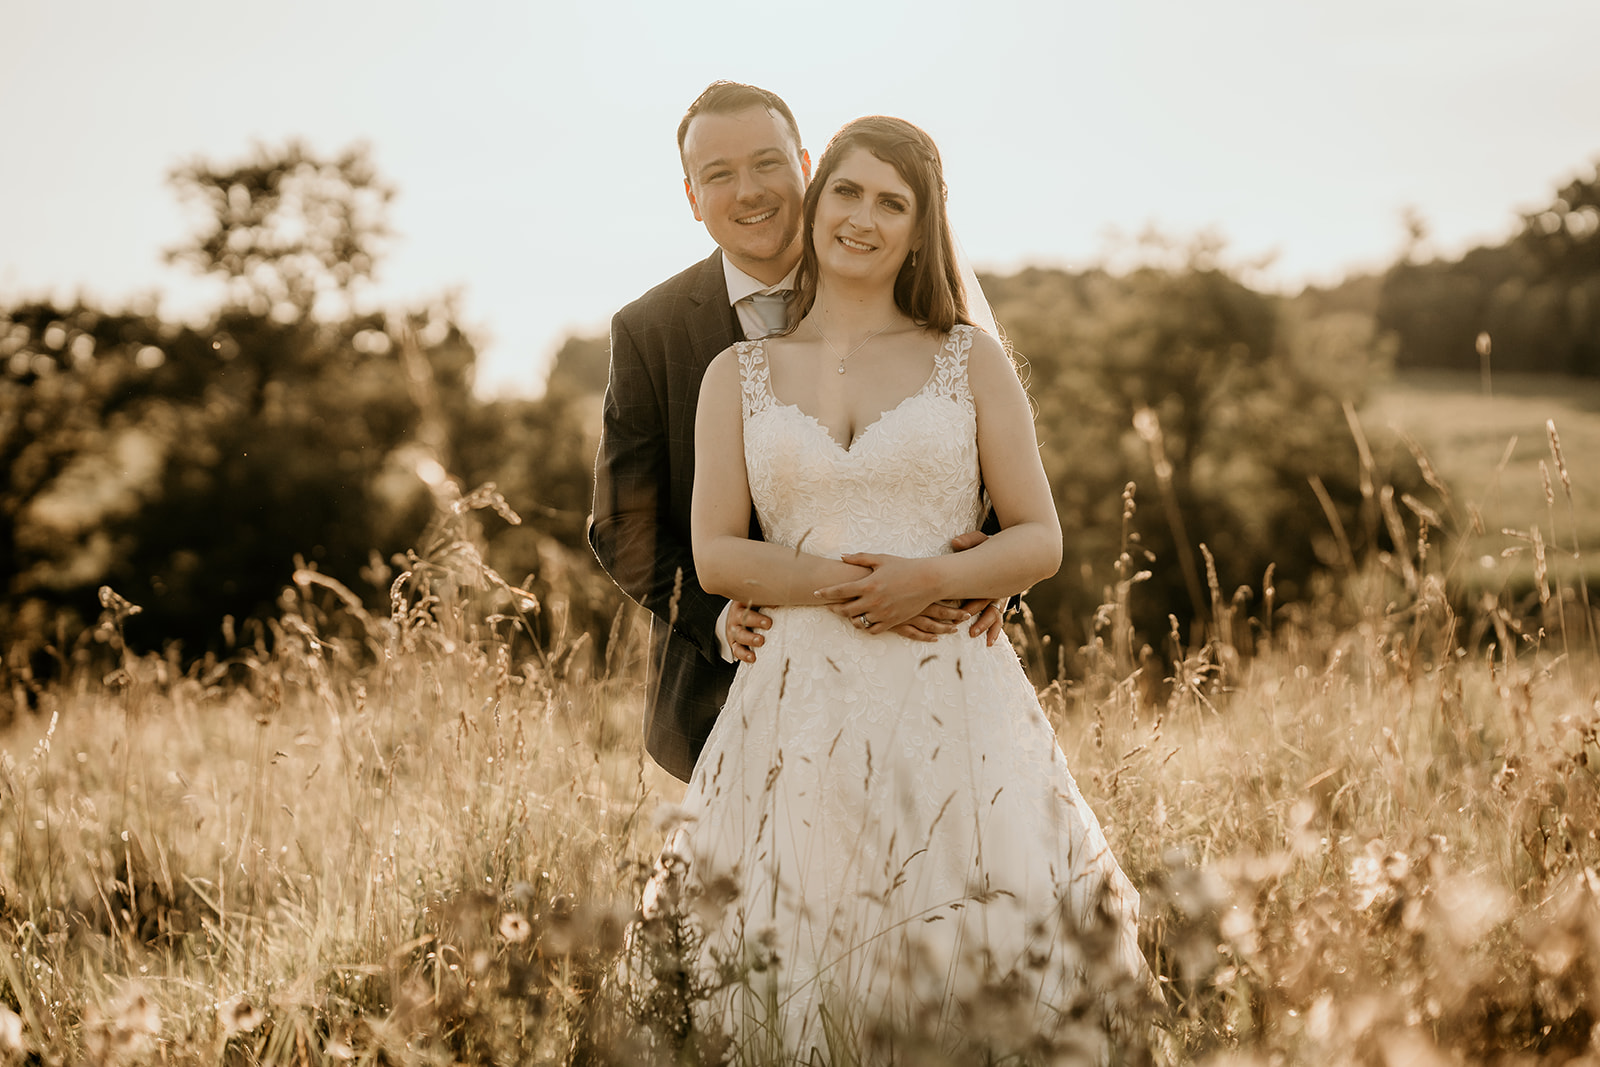 Beautiful wedding pictures at Shottle Hall